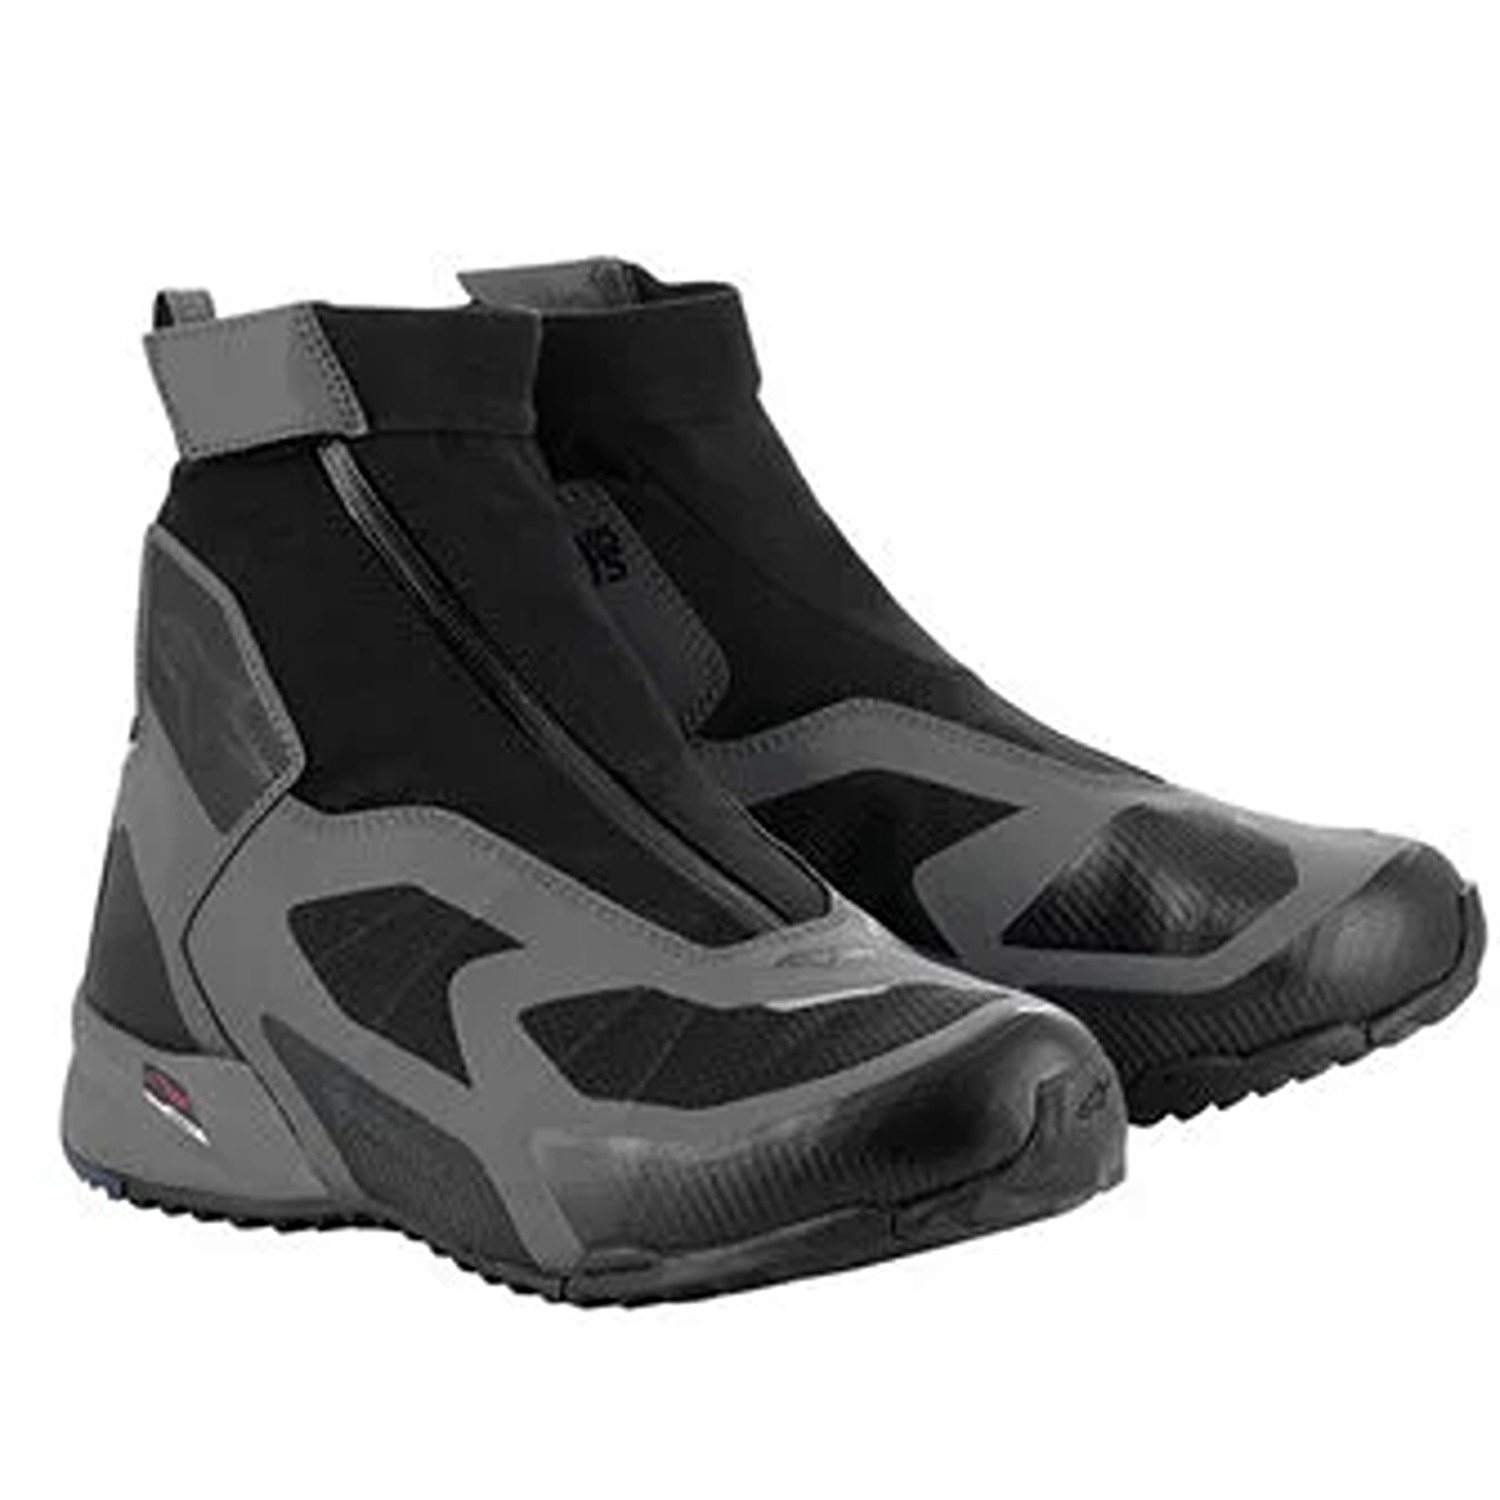 Image of EU Alpinestars CR-8 Gore-Tex Shoes Black Mid Gray Bright Red Taille US 9